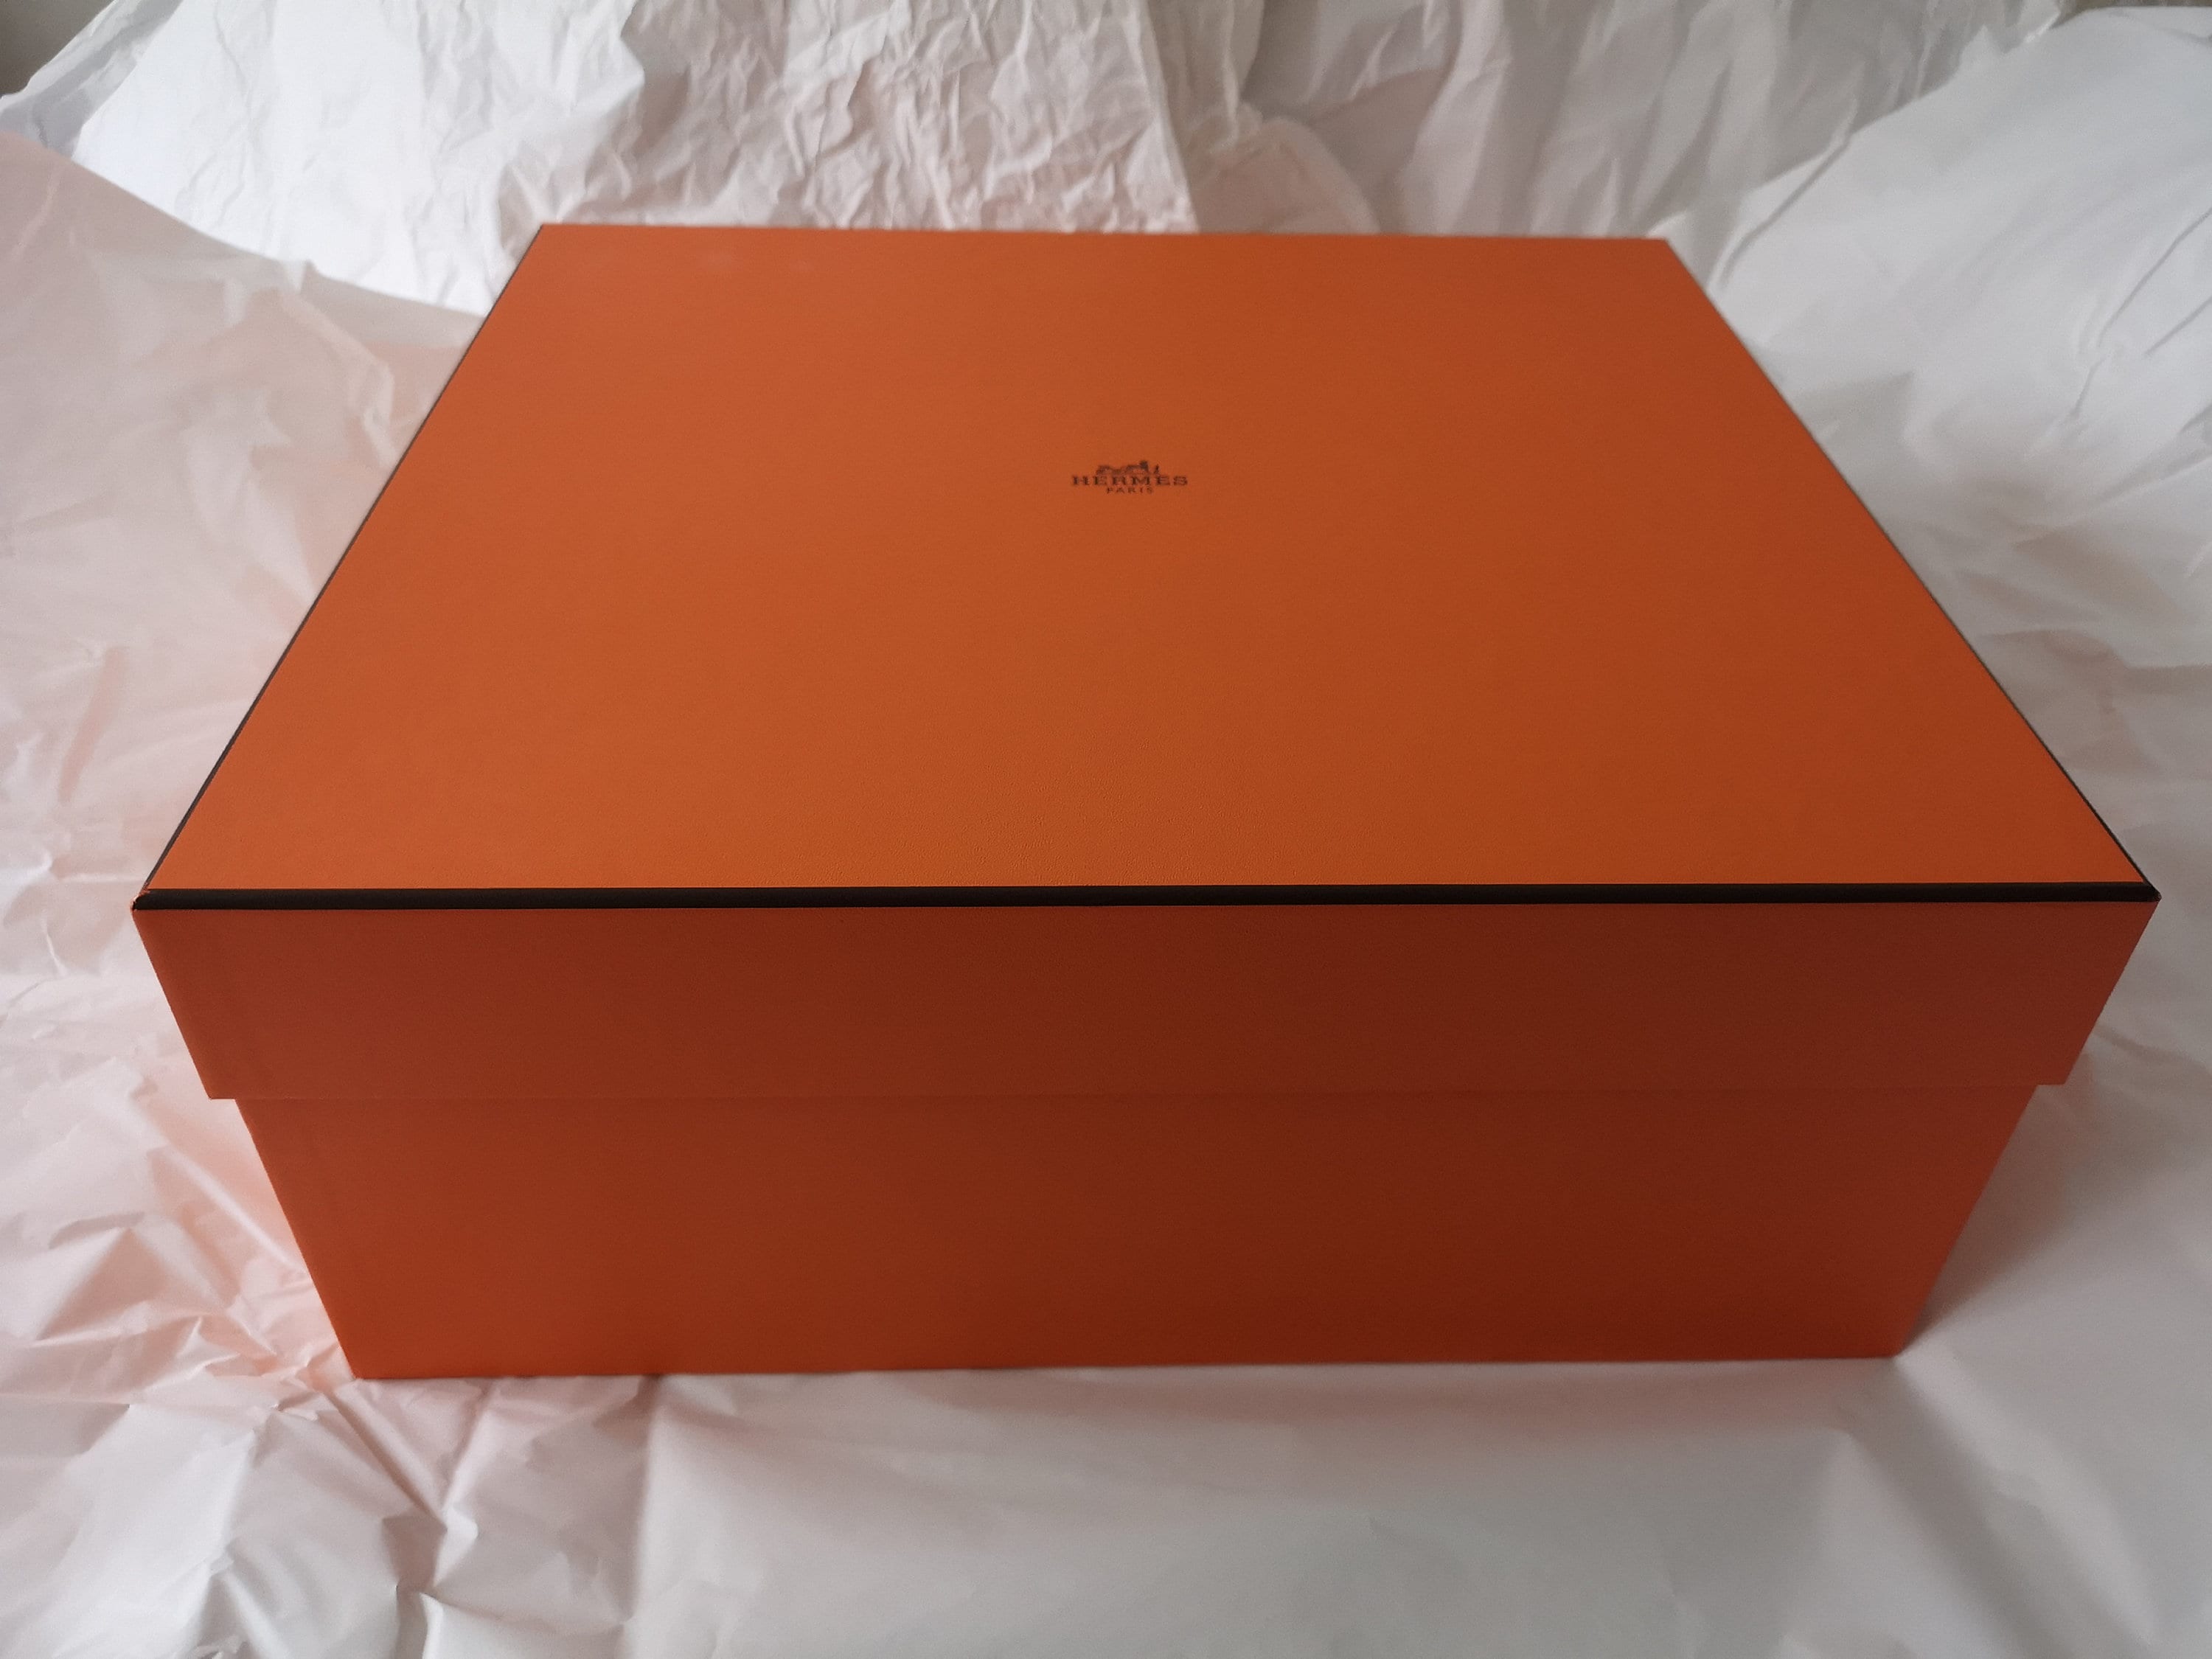 Authentic Hermes Gift Box 12” X 12” X 2.5” with Authentic Card